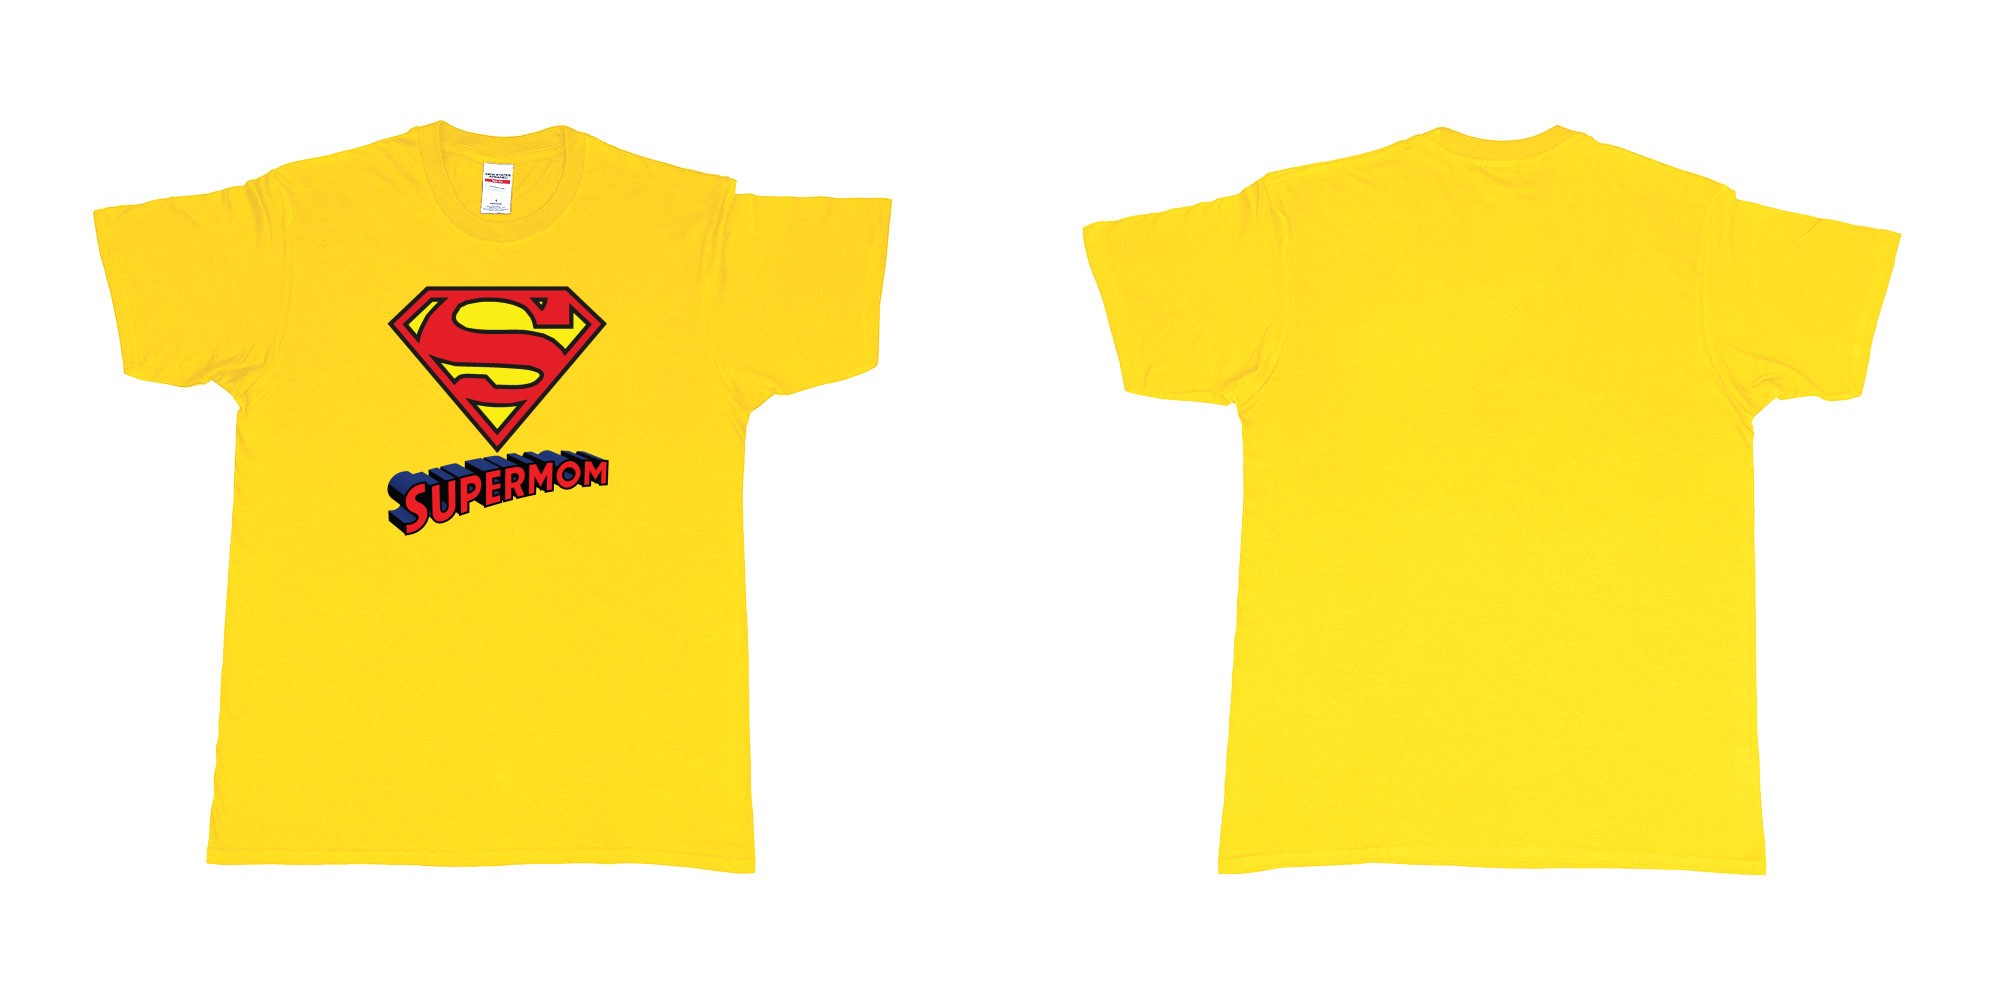 Custom tshirt design superman logo with own custom text print bali in fabric color daisy choice your own text made in Bali by The Pirate Way